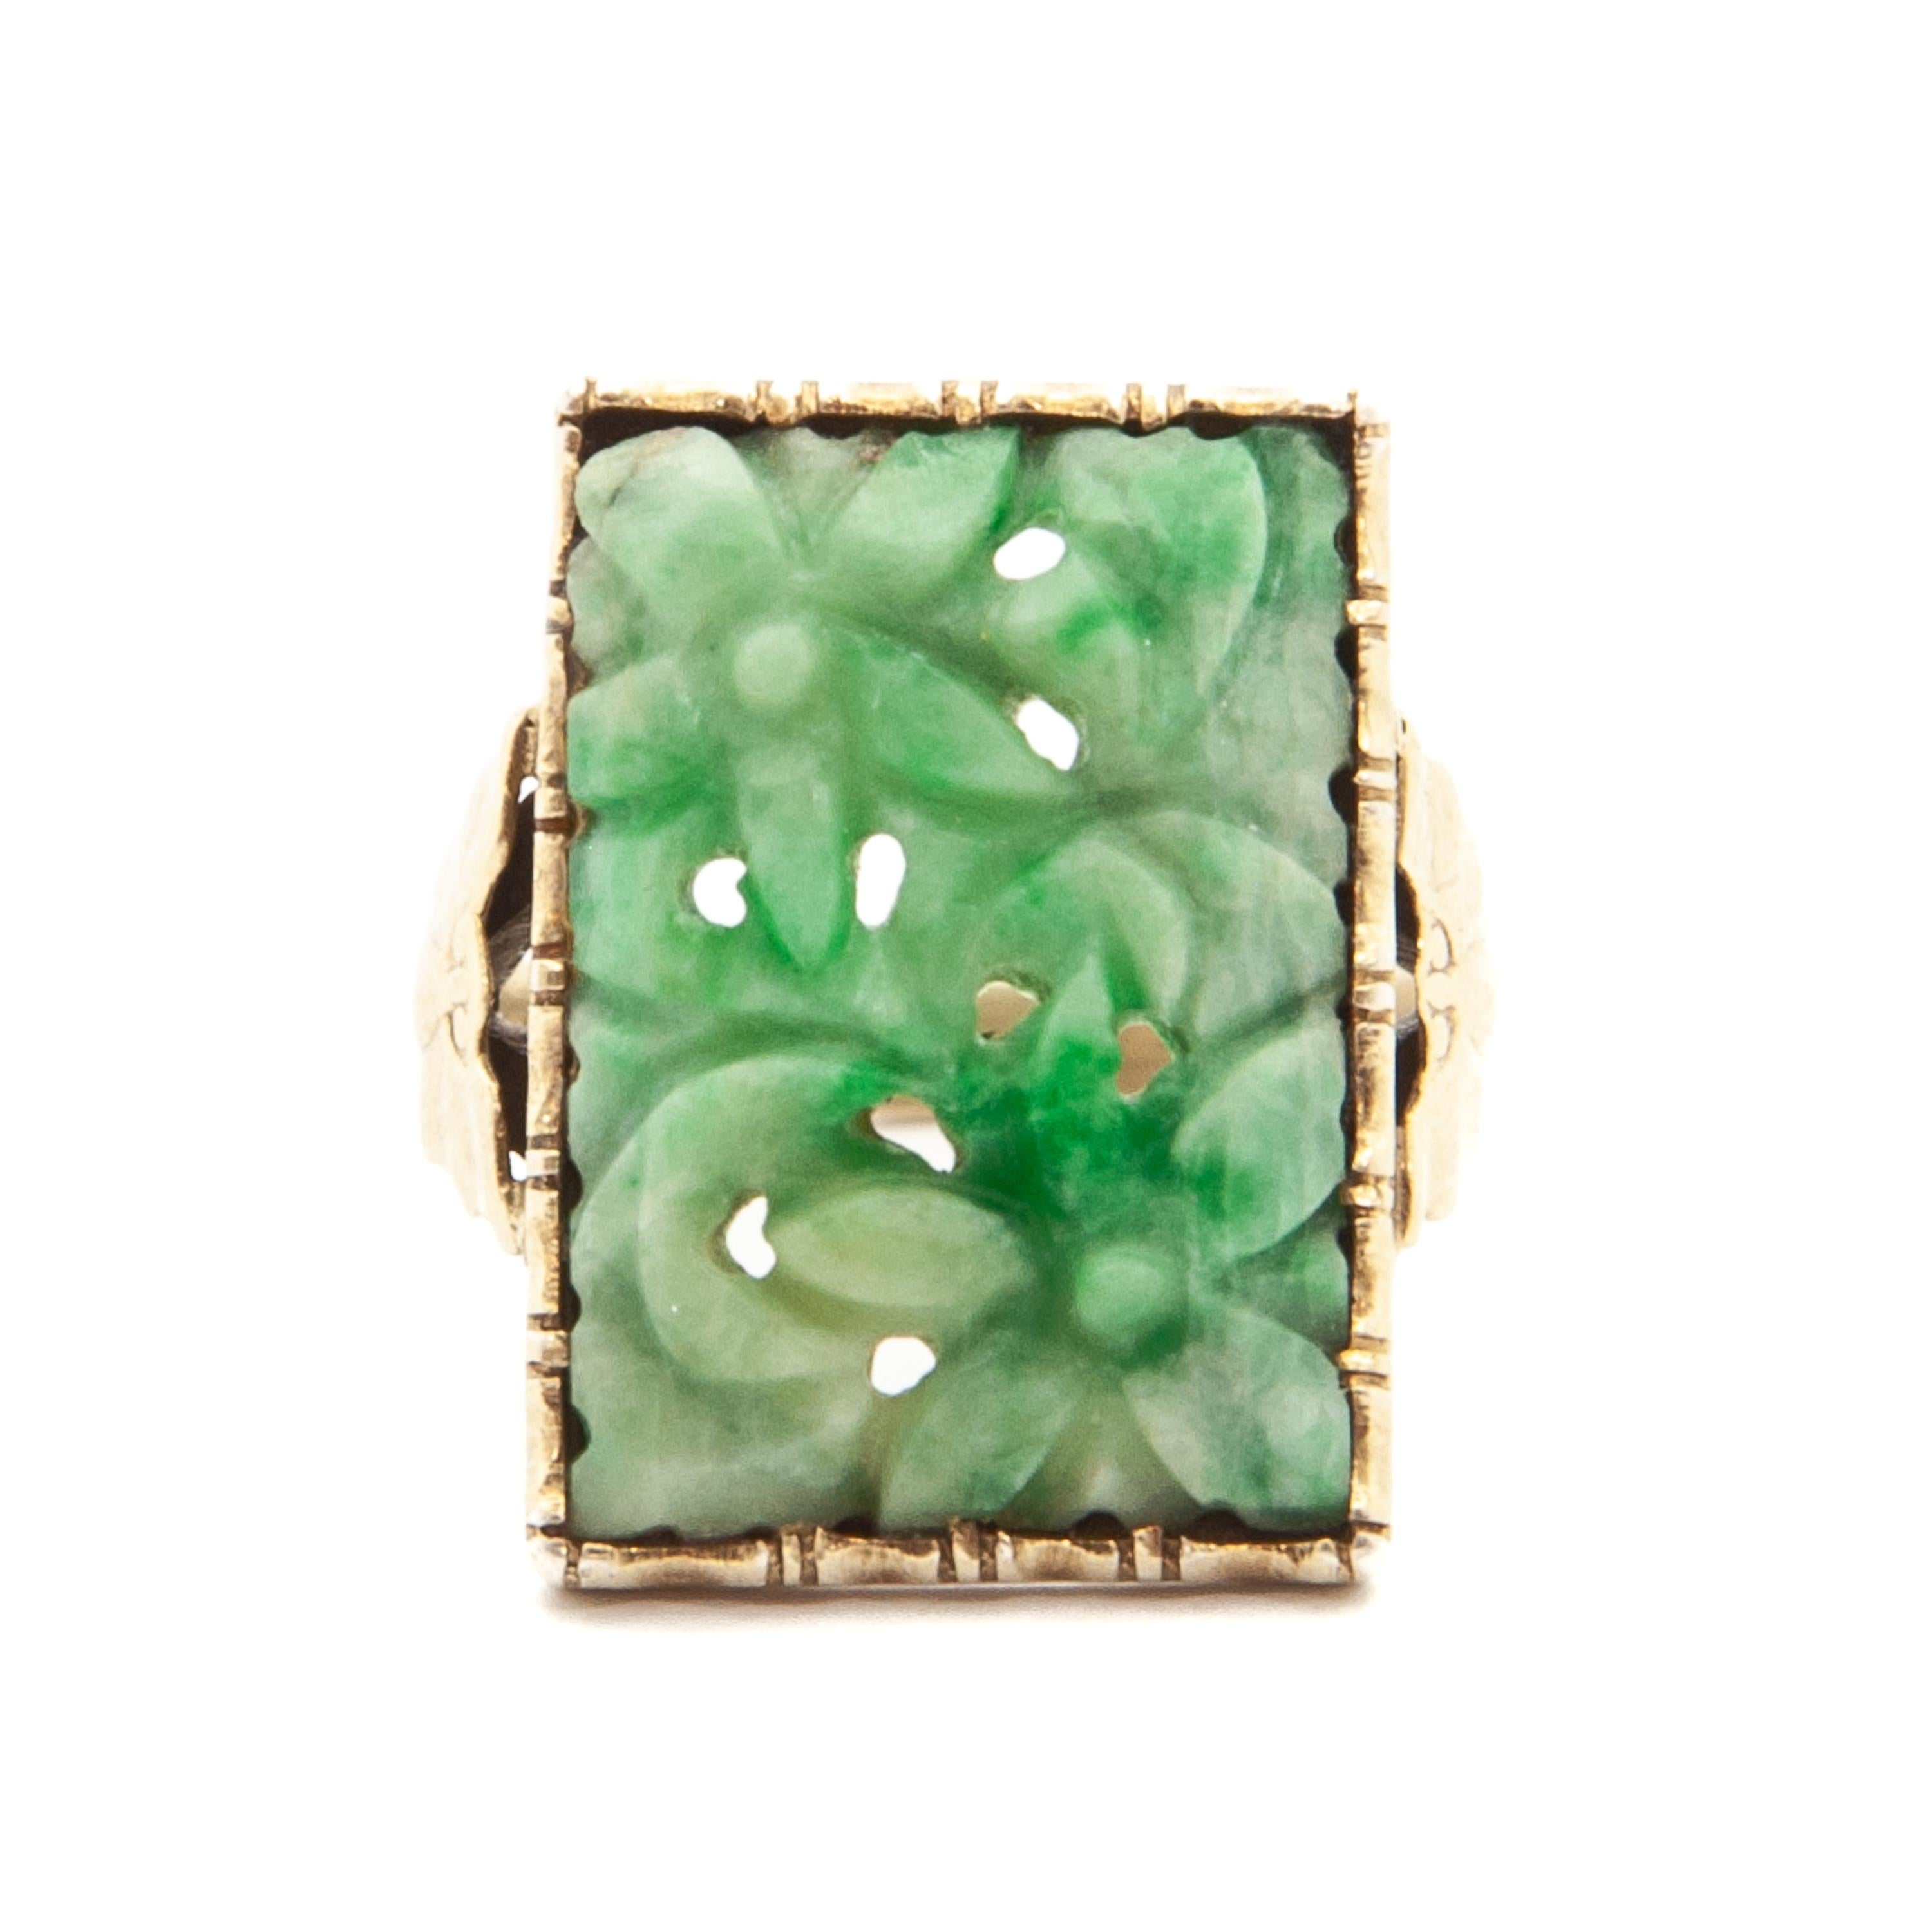 An Art Deco carved green jade ring set with a rectangular 835 gilded silver panel. The design is characterized by her floral carved motifs featuring bat shoulders. The ring dates from early 20th century. Beautifully Chinese green jade mounted in